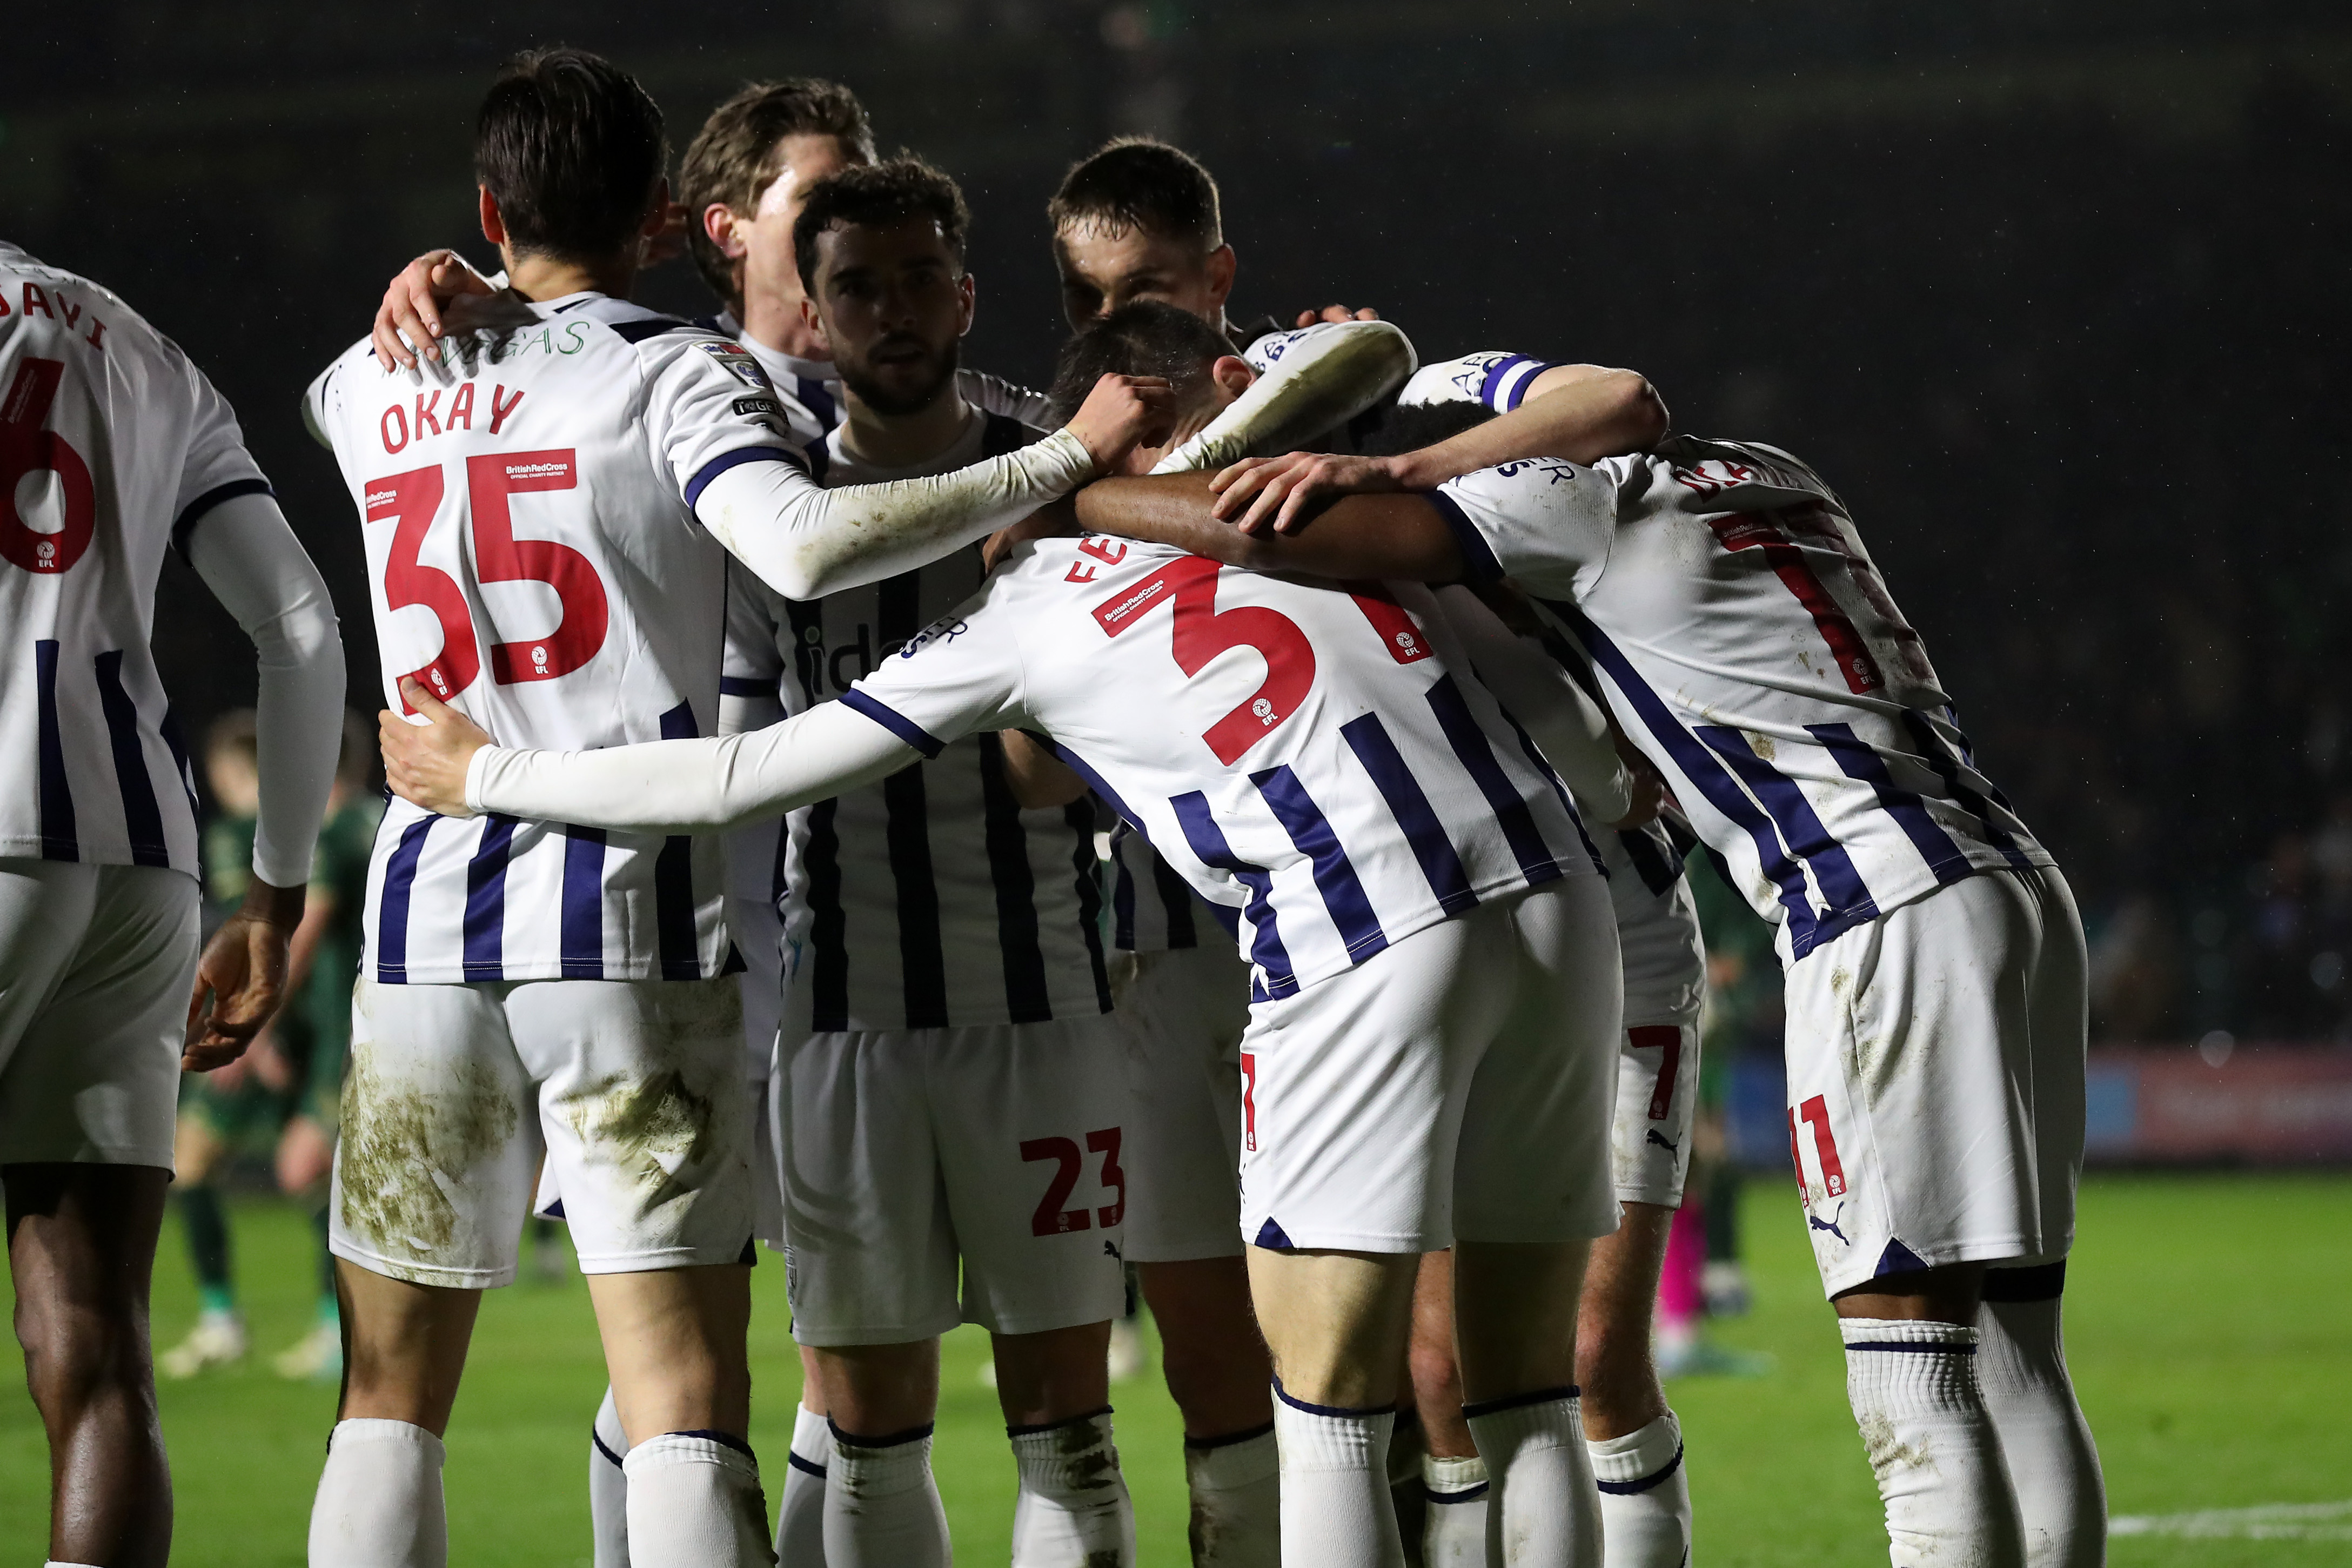 Albion players in a huddle celebrate after scoring a goal at Plymouth 